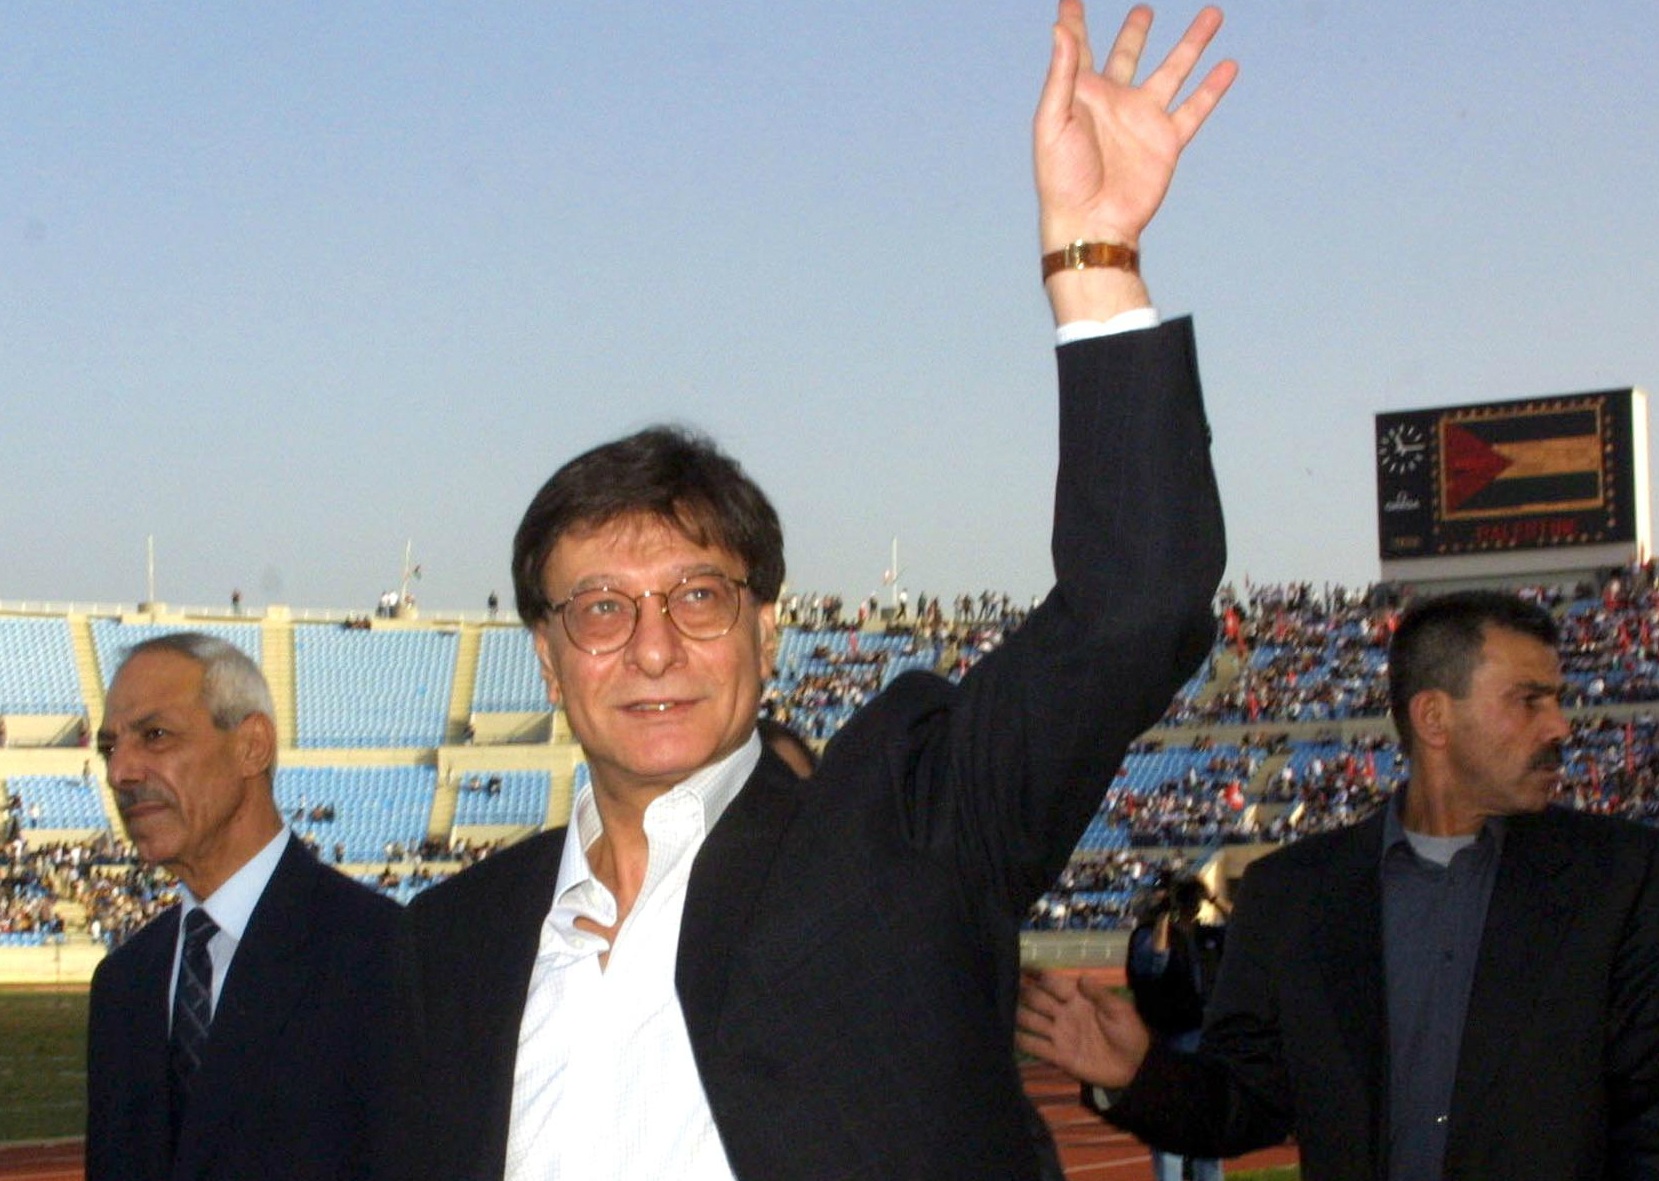 Palestinian poet Mahmoud Darwish waves to crowds before a concert and poetry reading in Beirut in April 2002 (AFP)